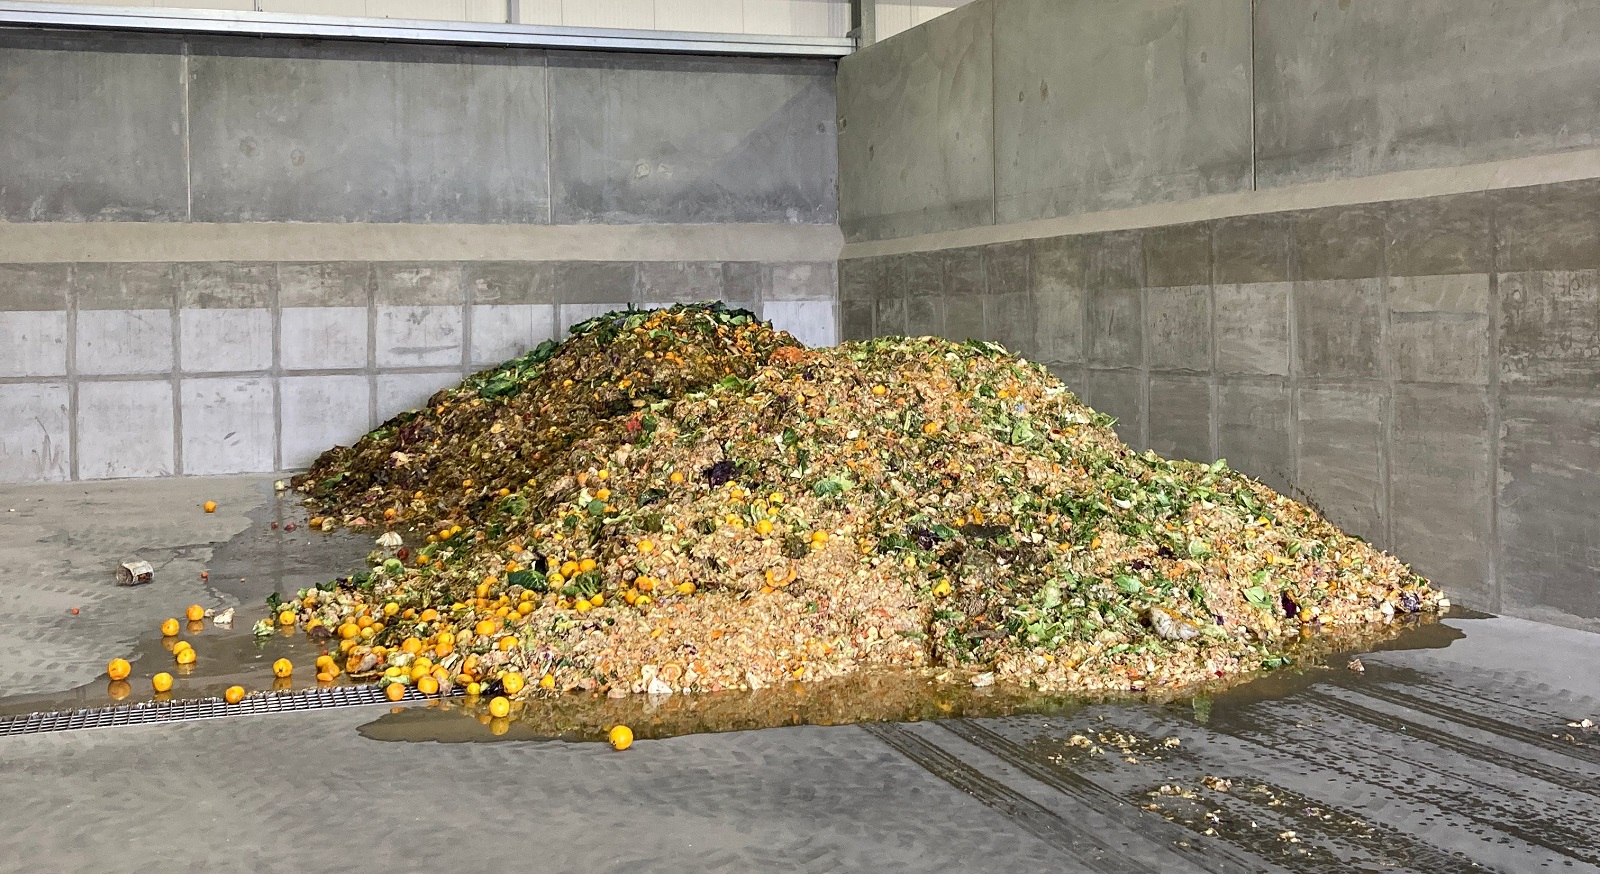 Food scraps are sent to Ecogas’ processing facility in Reporoa where they are converted into liquid fertiliser and biogas.